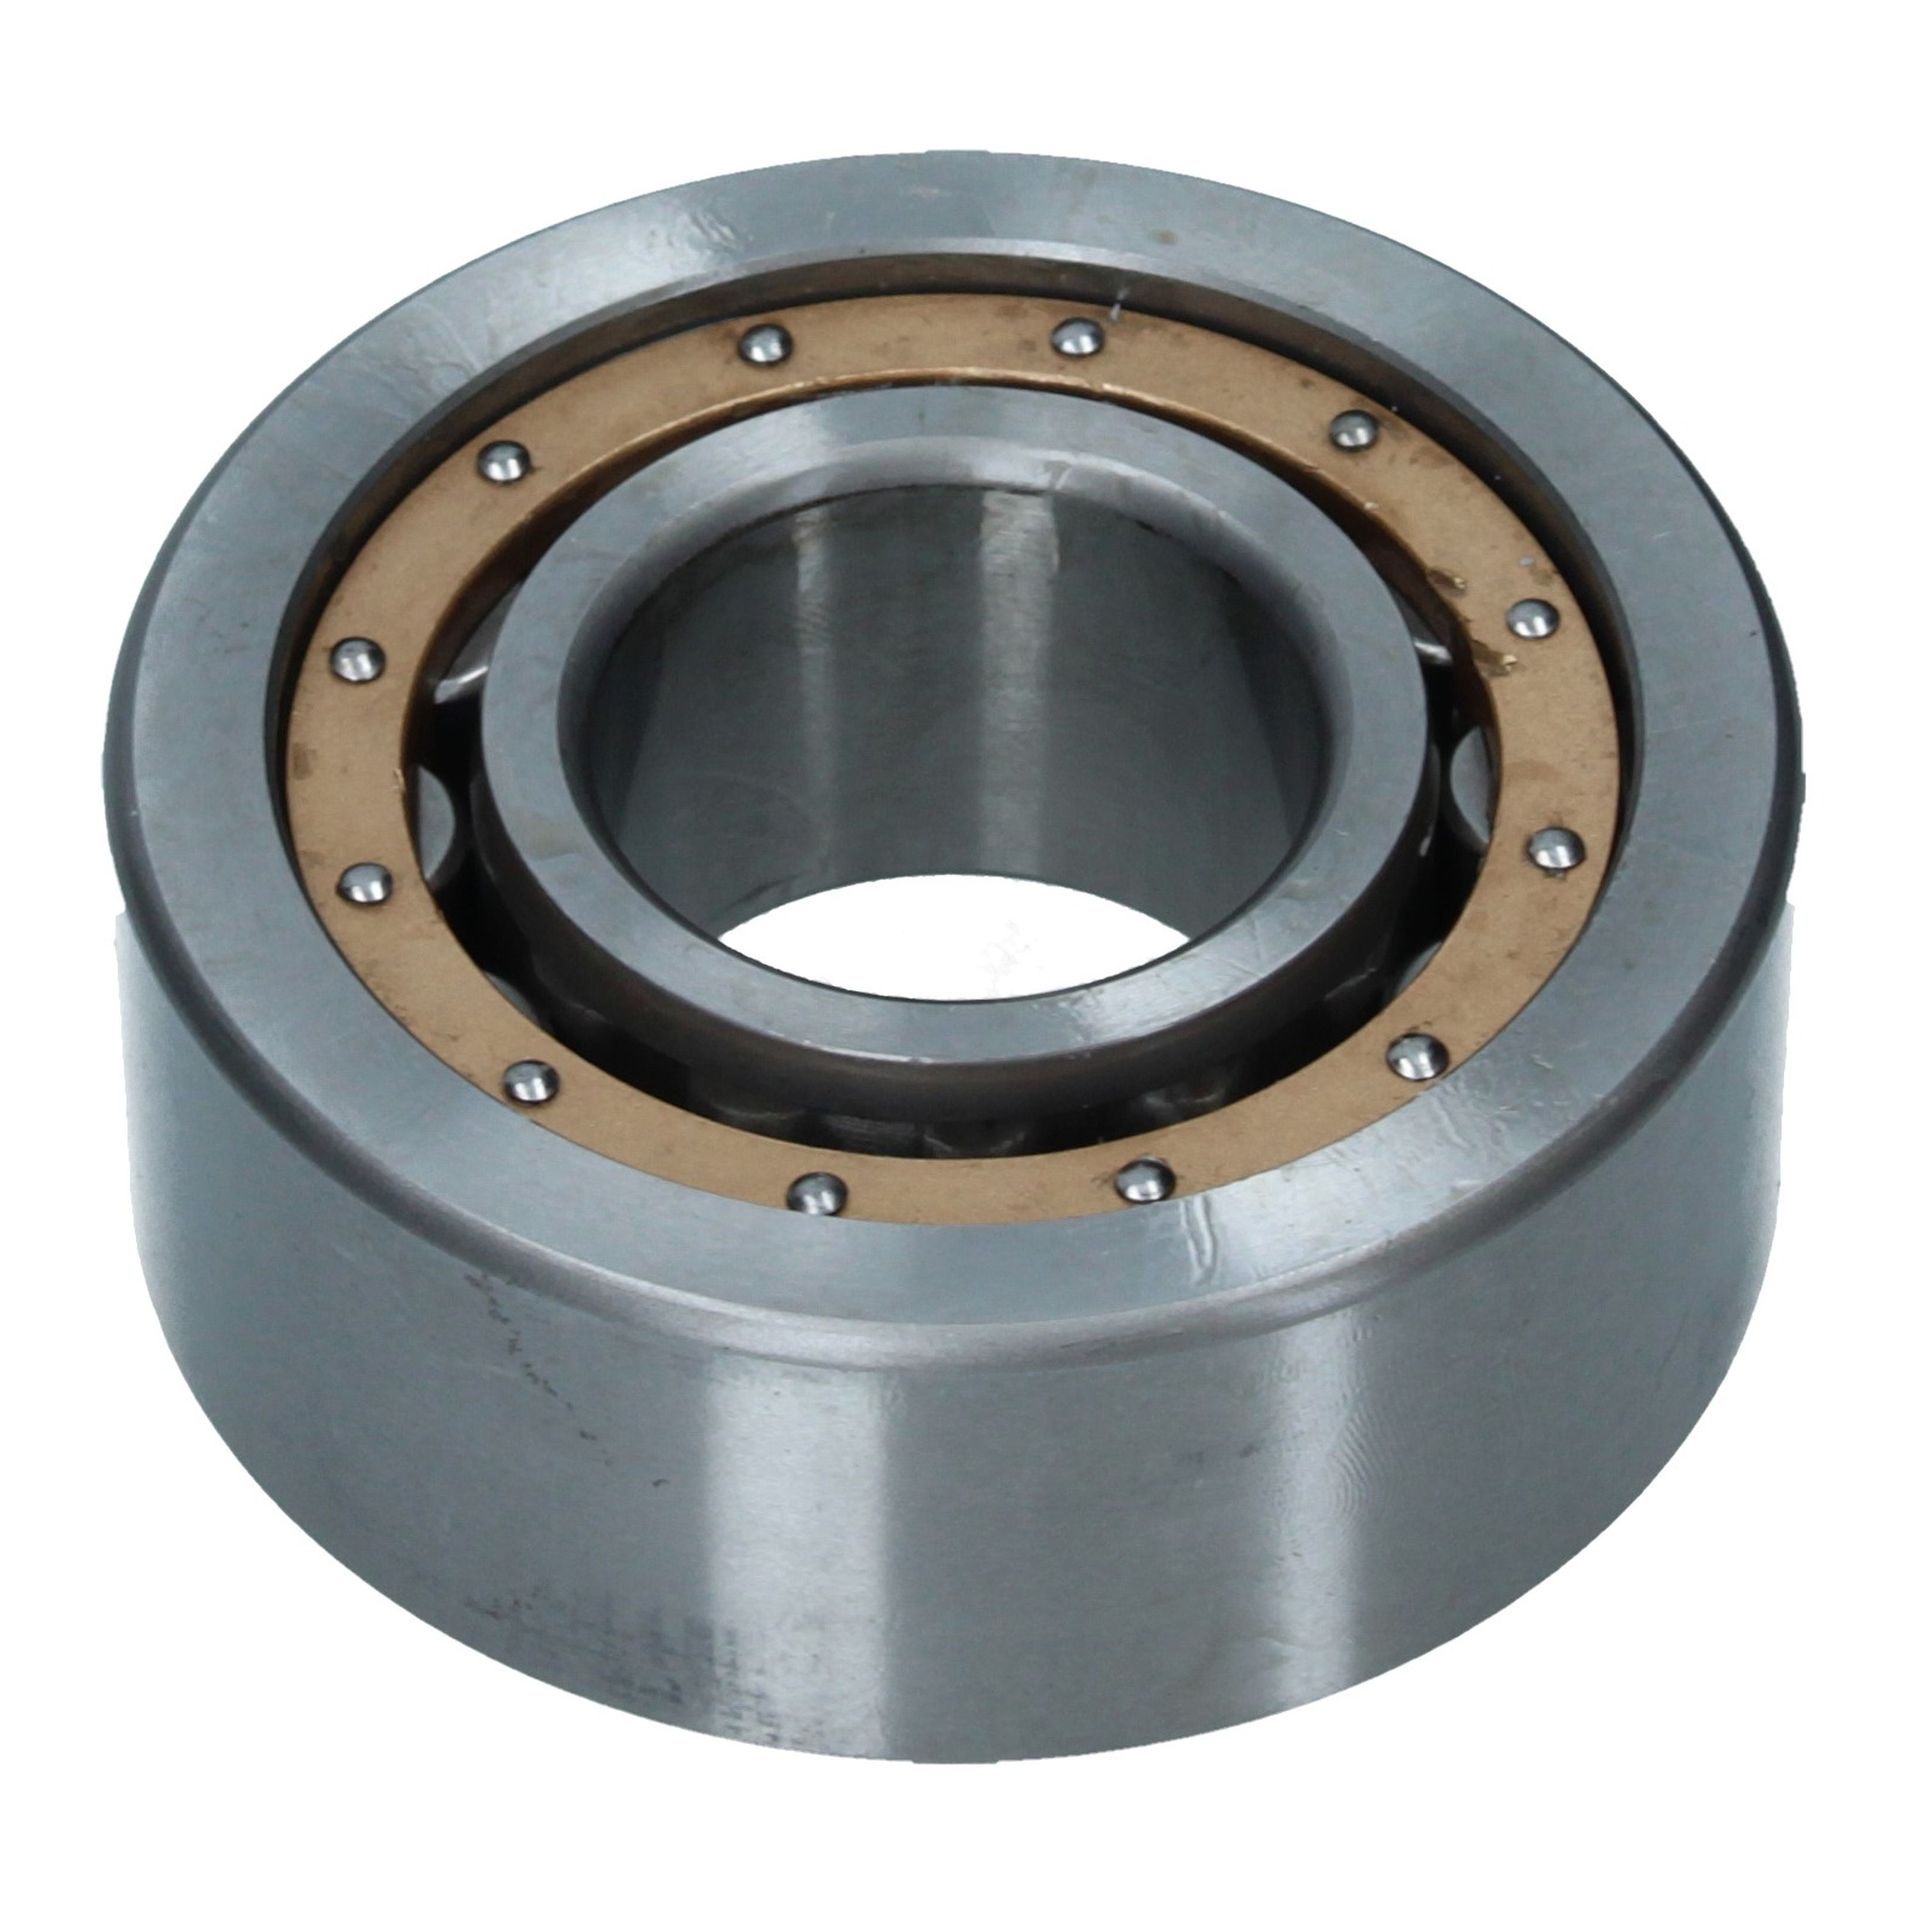 Diff Roller Bearing 250 75/32/28